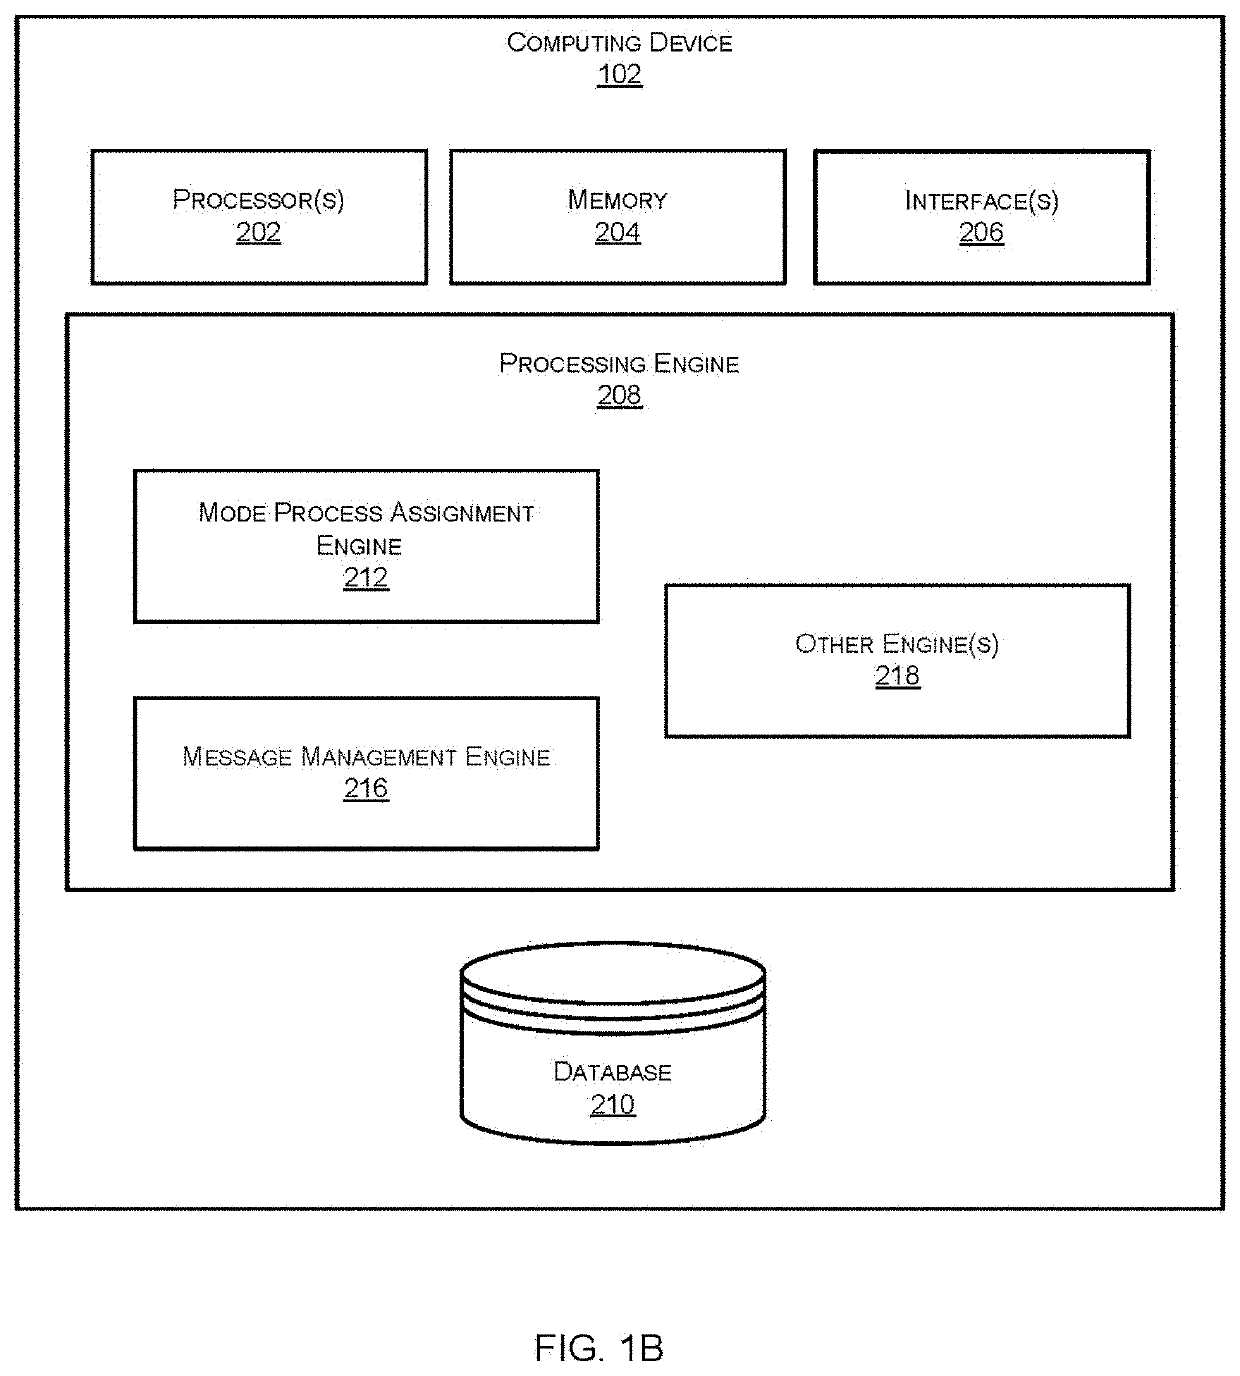 Providing a secure communication channel between kernel and user mode components